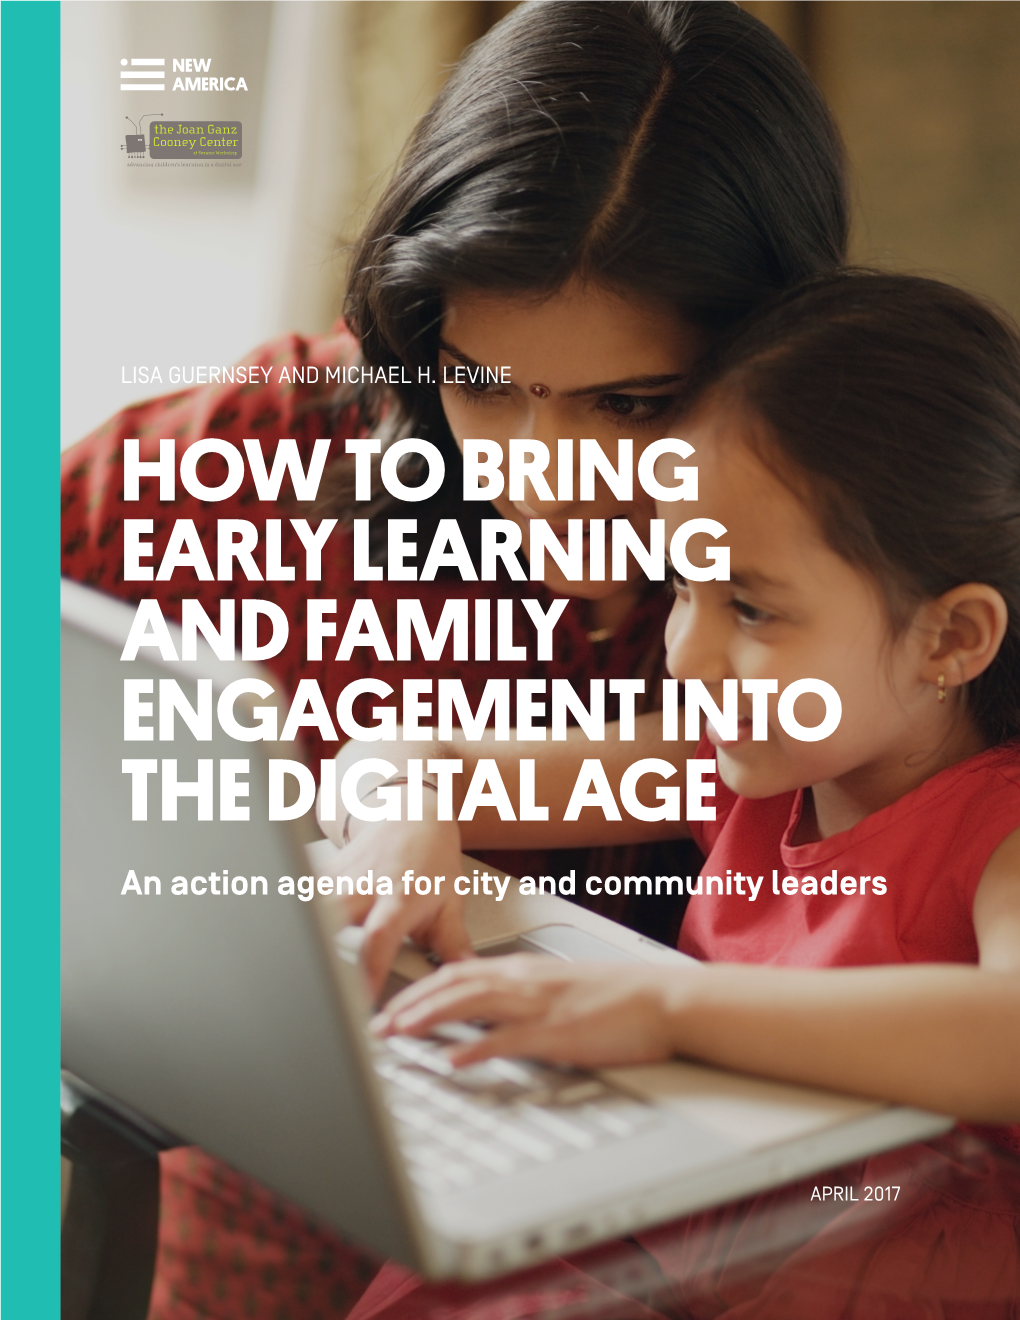 How to Bring Early Learning and Family Engagement Into a Digital